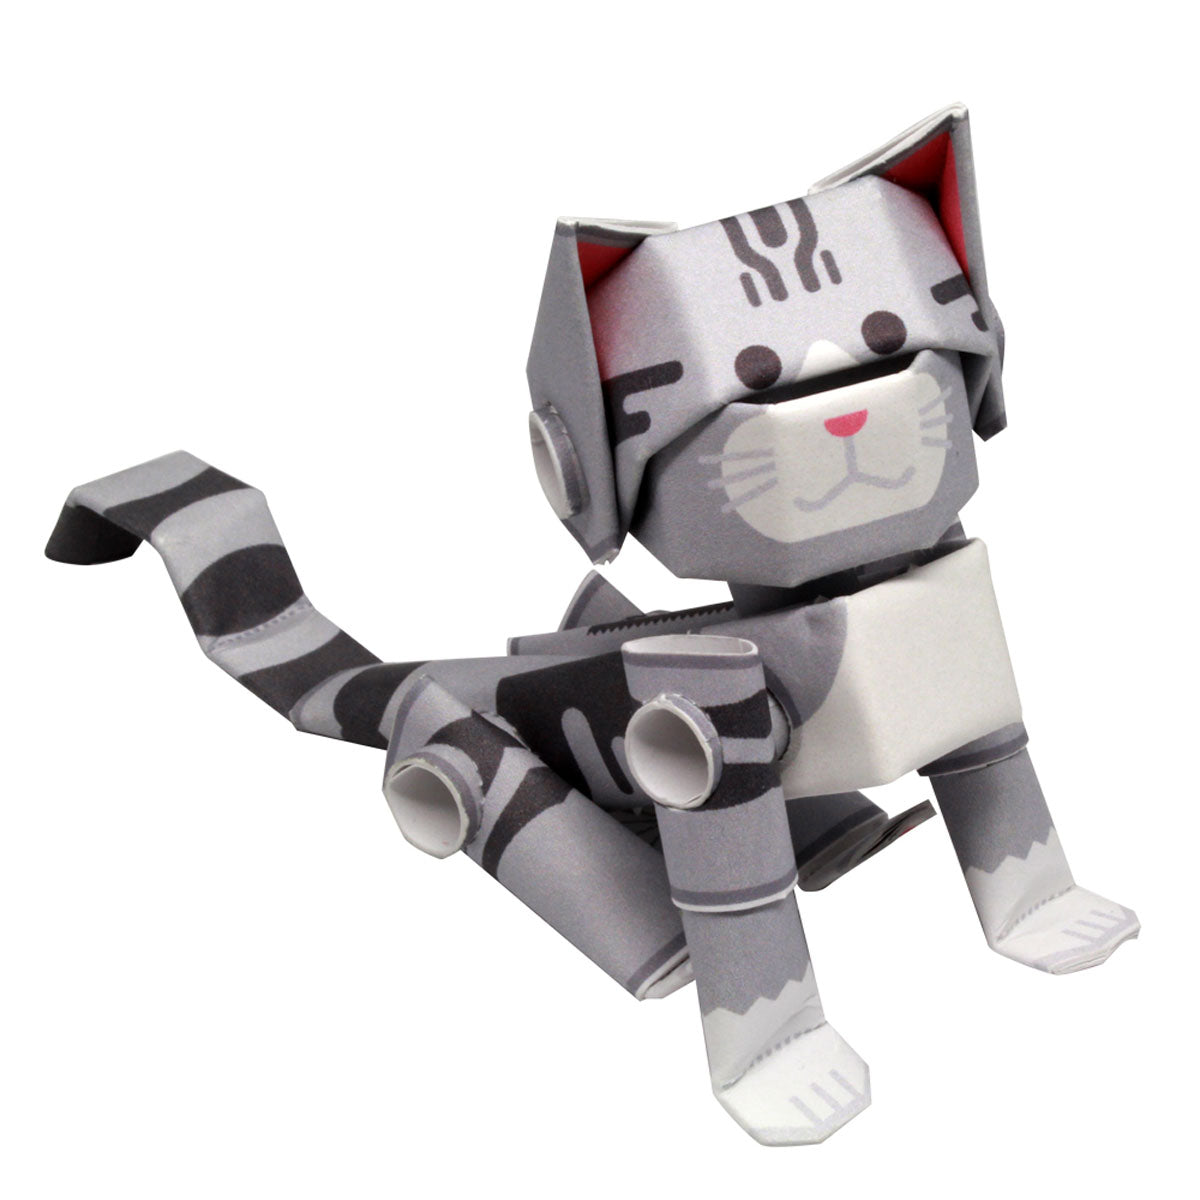 Alternate view of silver tabby cat from make your own cat kit from Piperoid